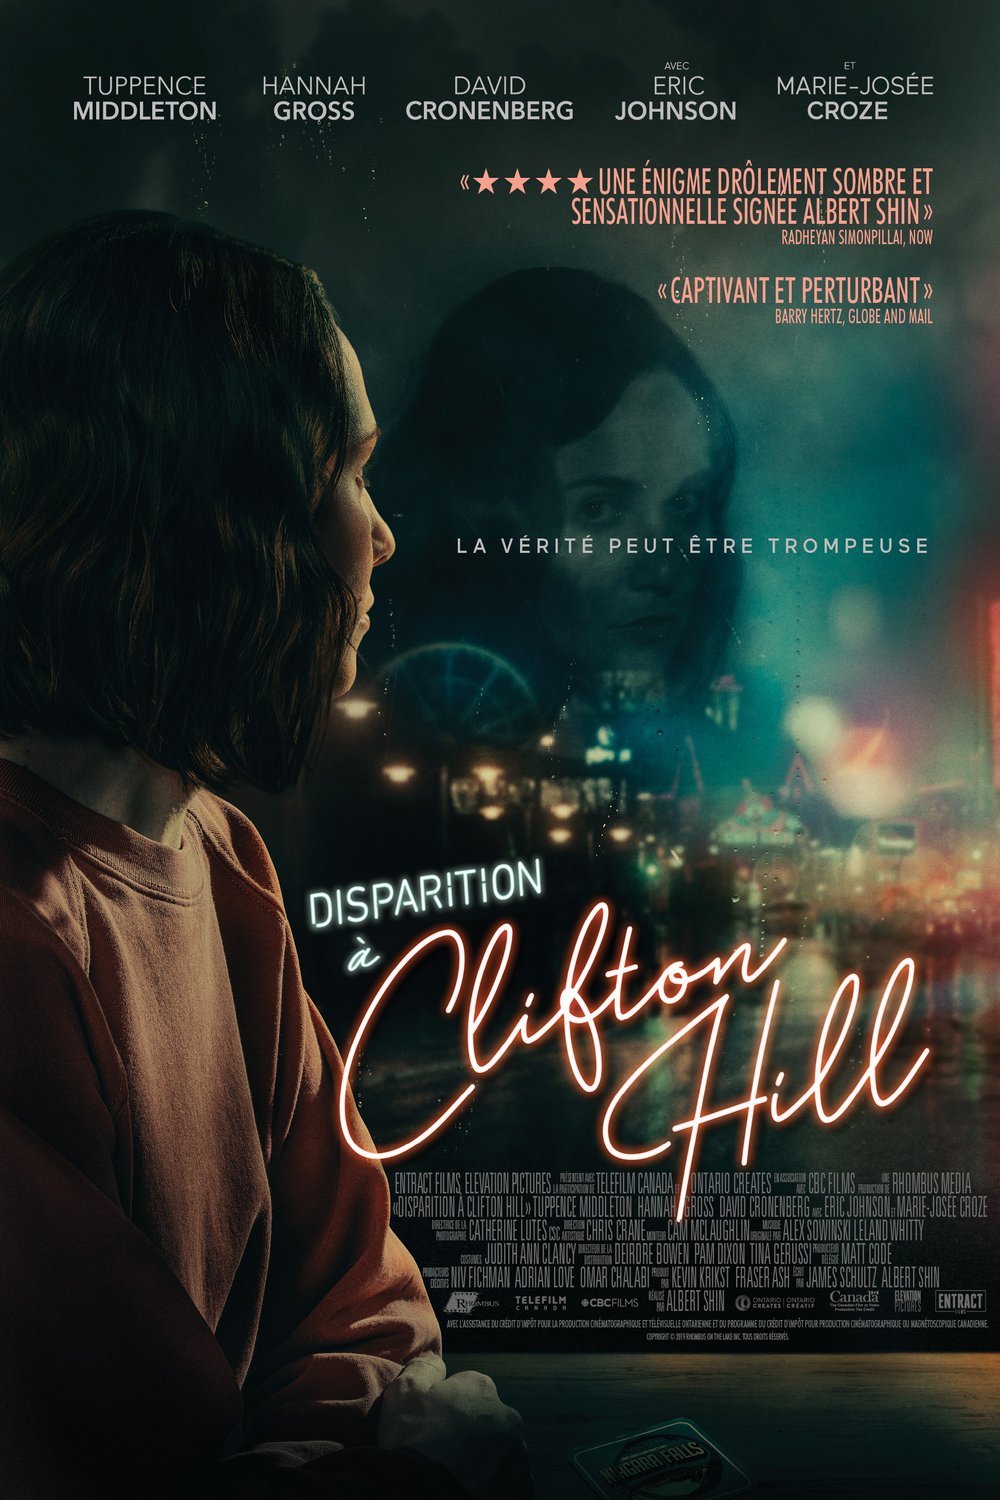 Poster of the movie Disparition à Clifton Hill